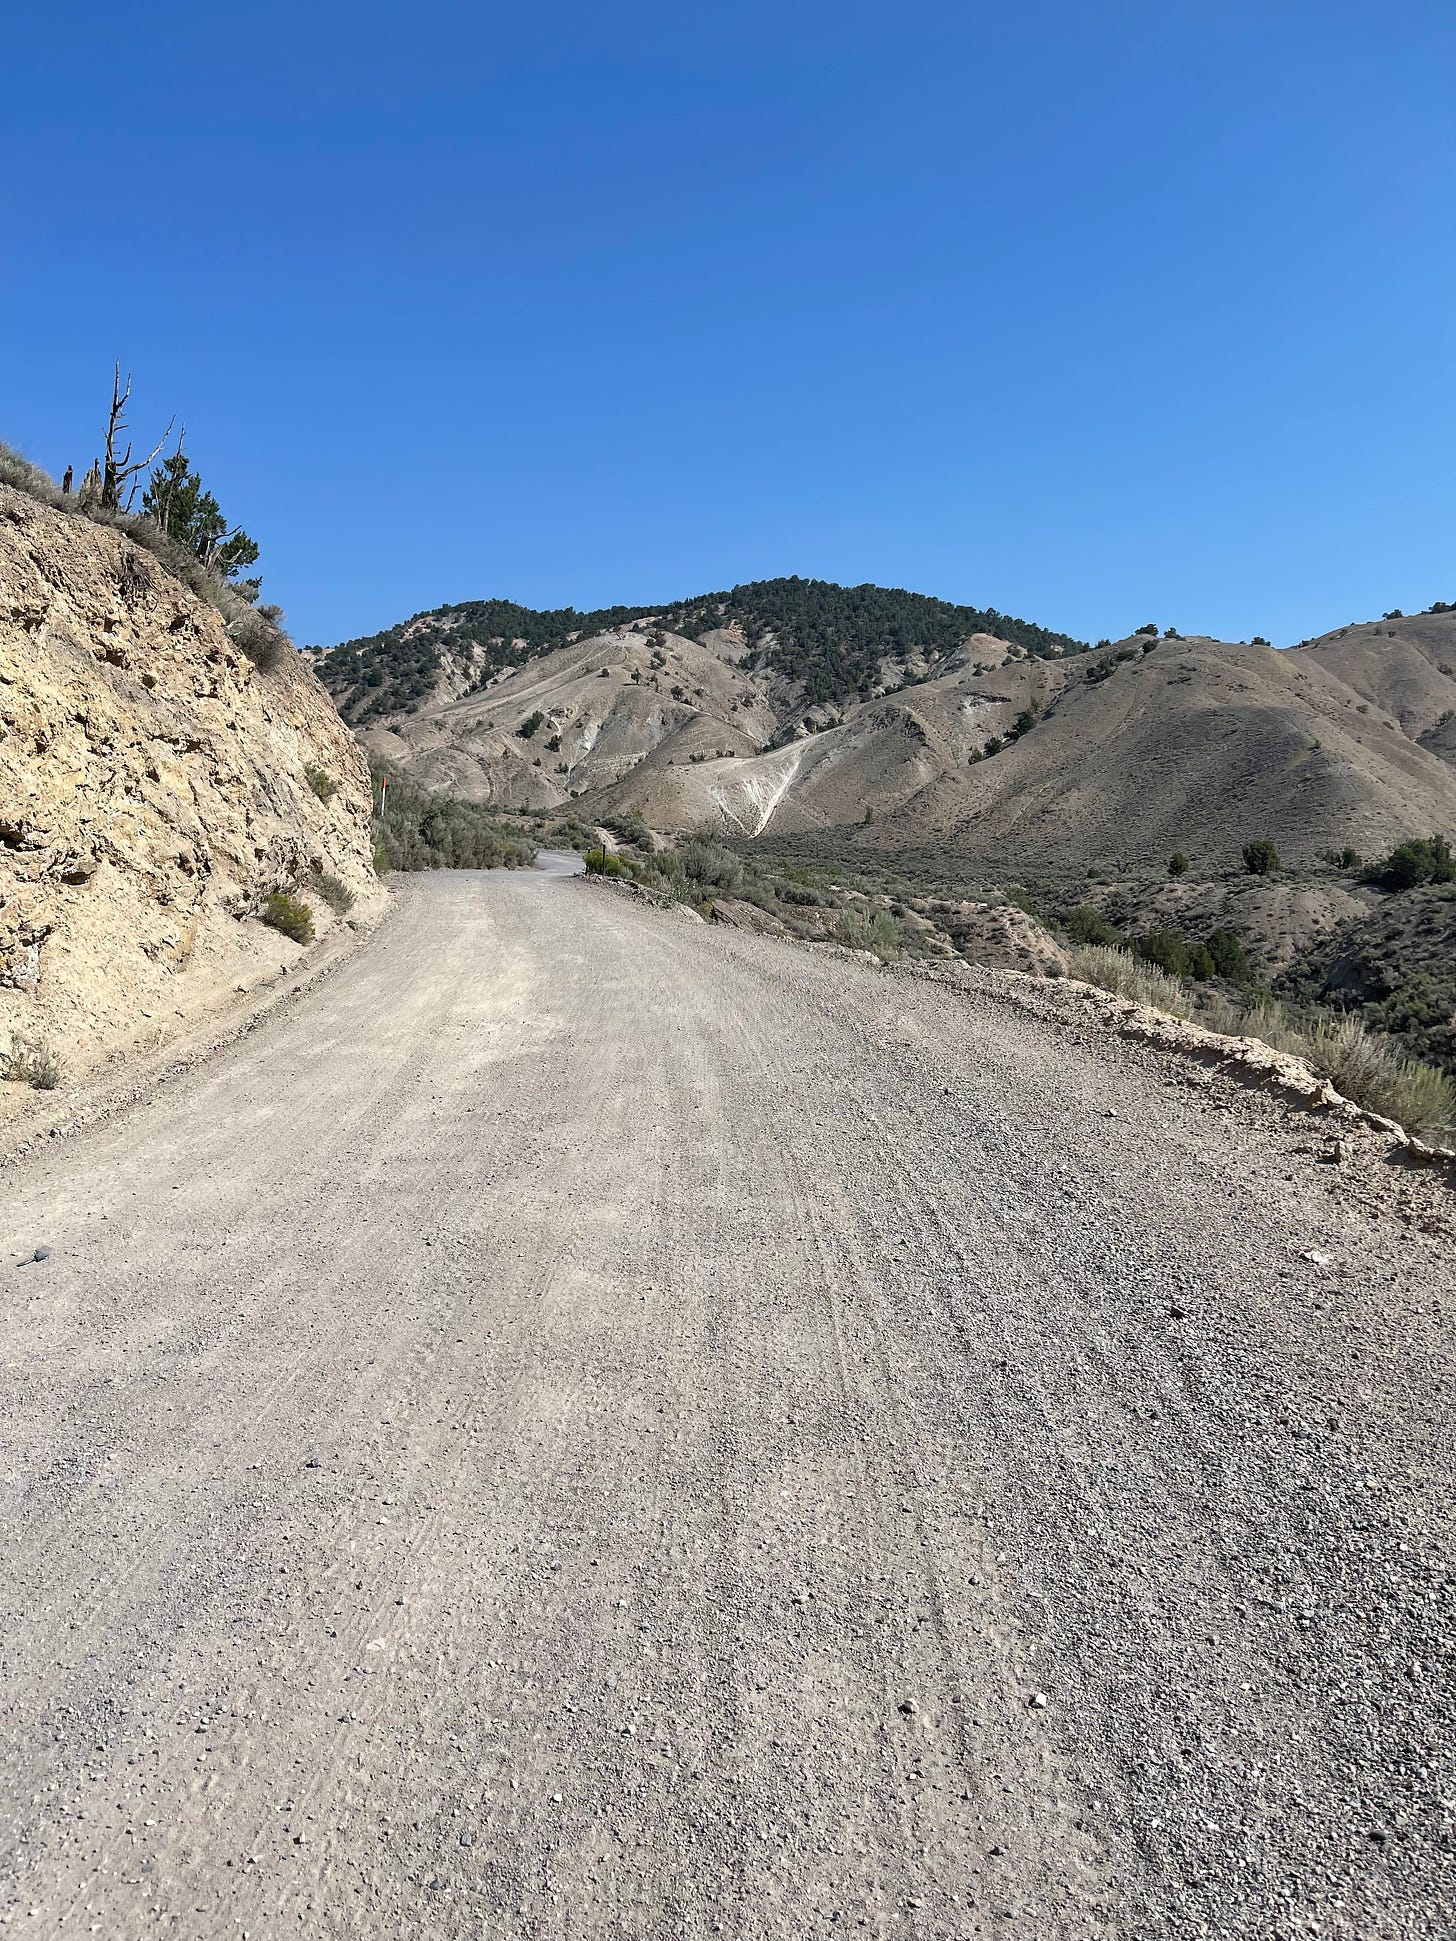 Dry road through low Eagle Valley hills